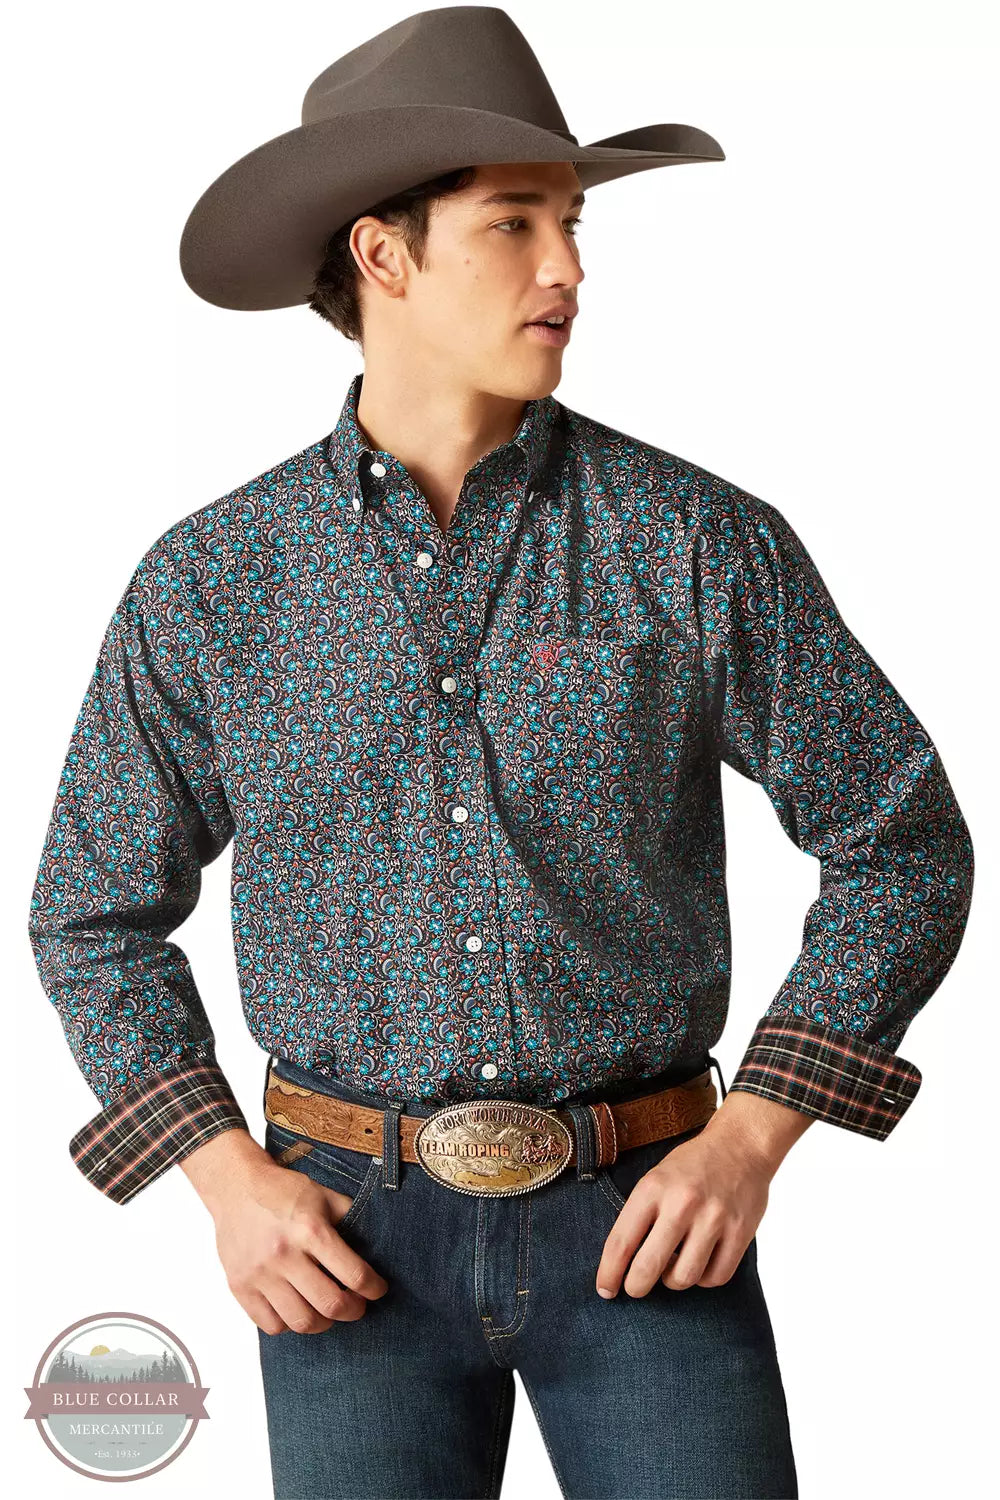  Ariat 10047342 Wrinkle Free Gryffin Classic Fit Long Sleeve Shirt in Teal Paisley Front View